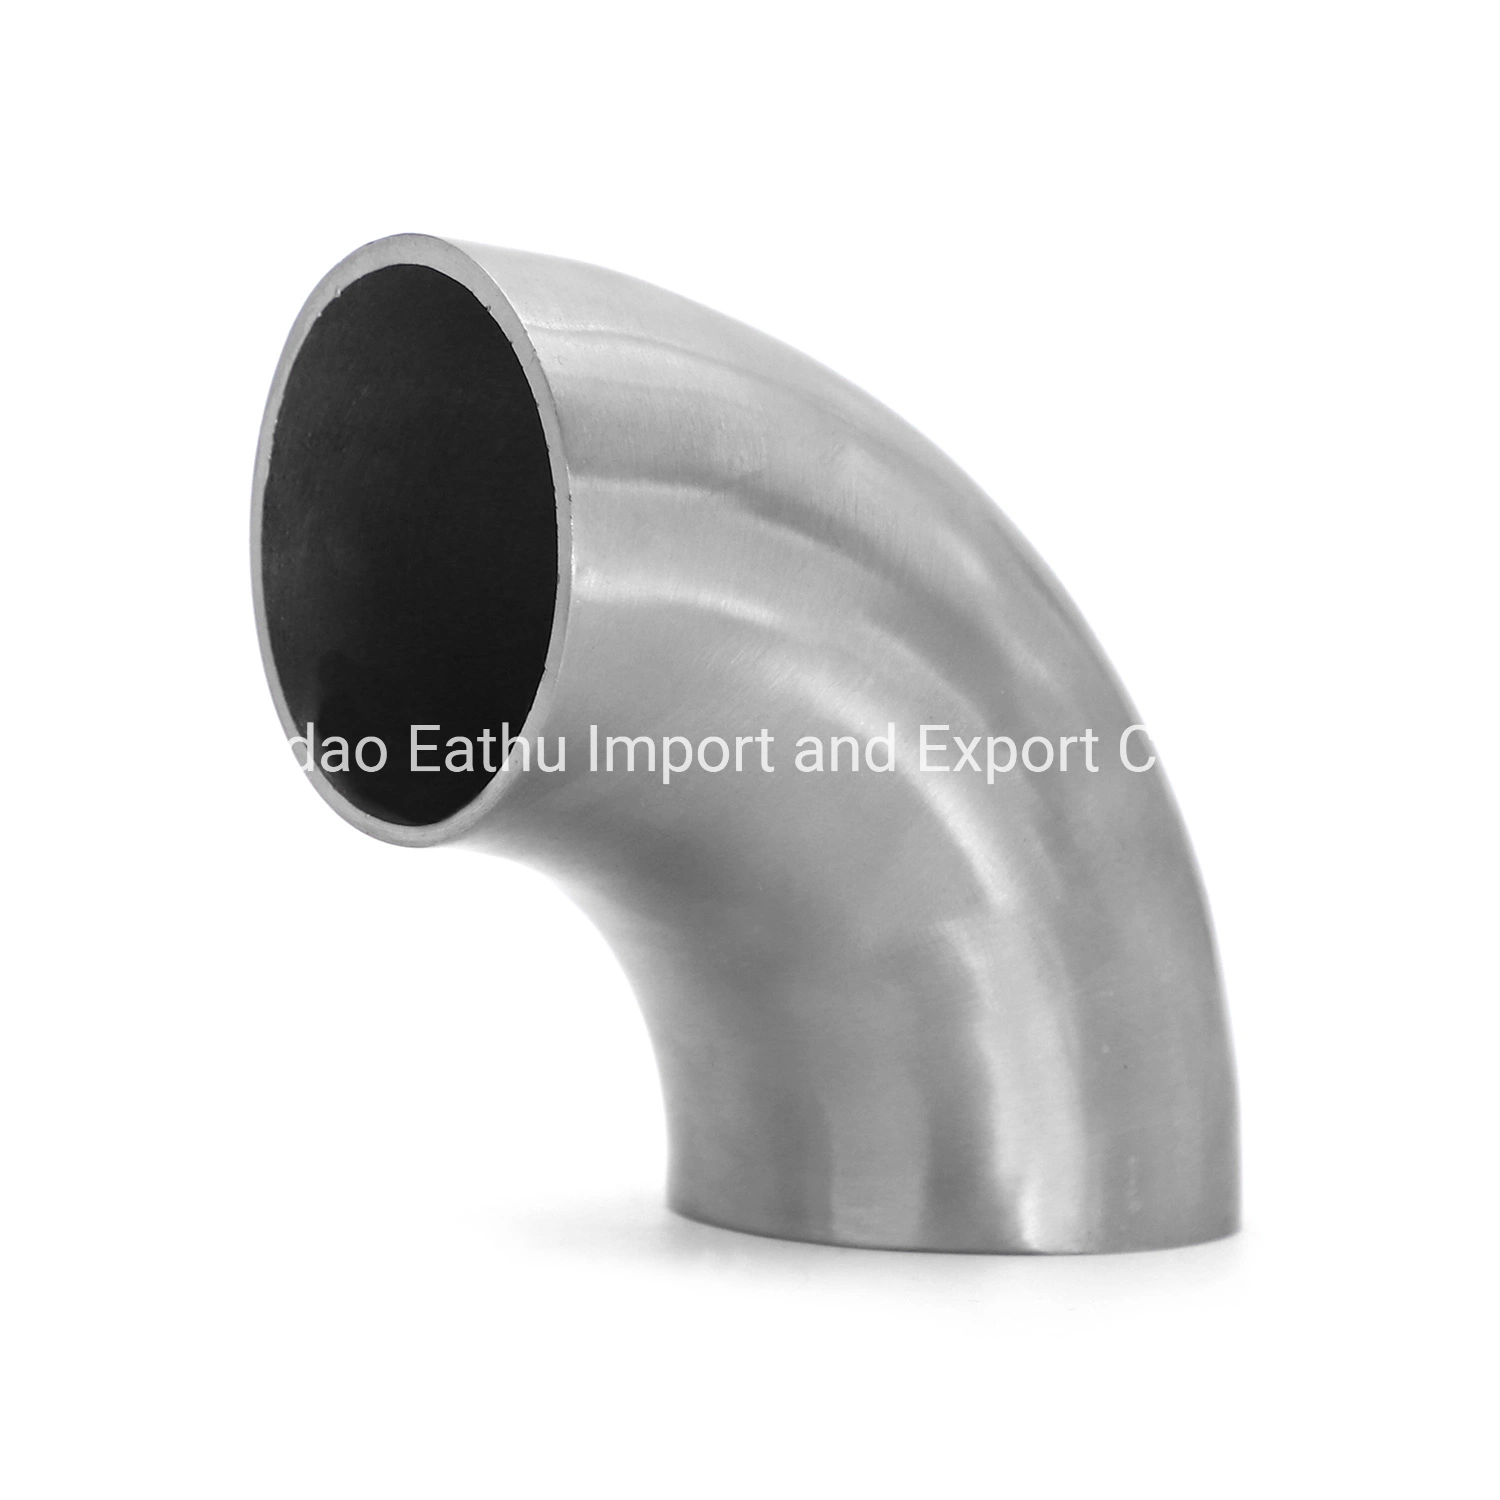 ASME/ANSI B16.9 Seamless Carbon Steel Stainless Steel Butt Weld Fitting Cap Fittings